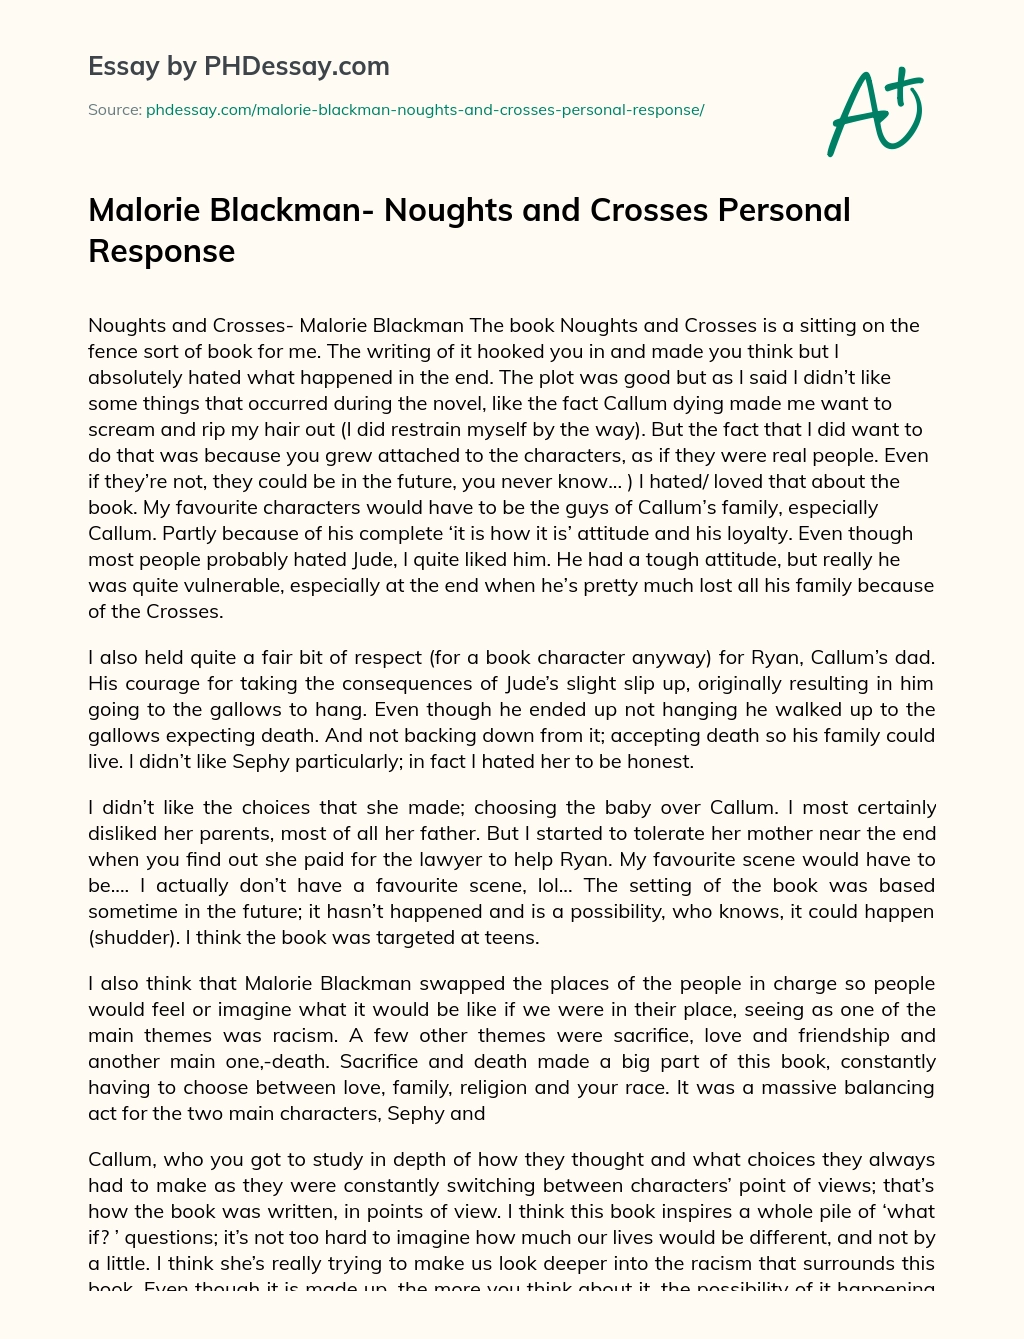 Malorie Blackman- Noughts and Crosses Personal Response essay